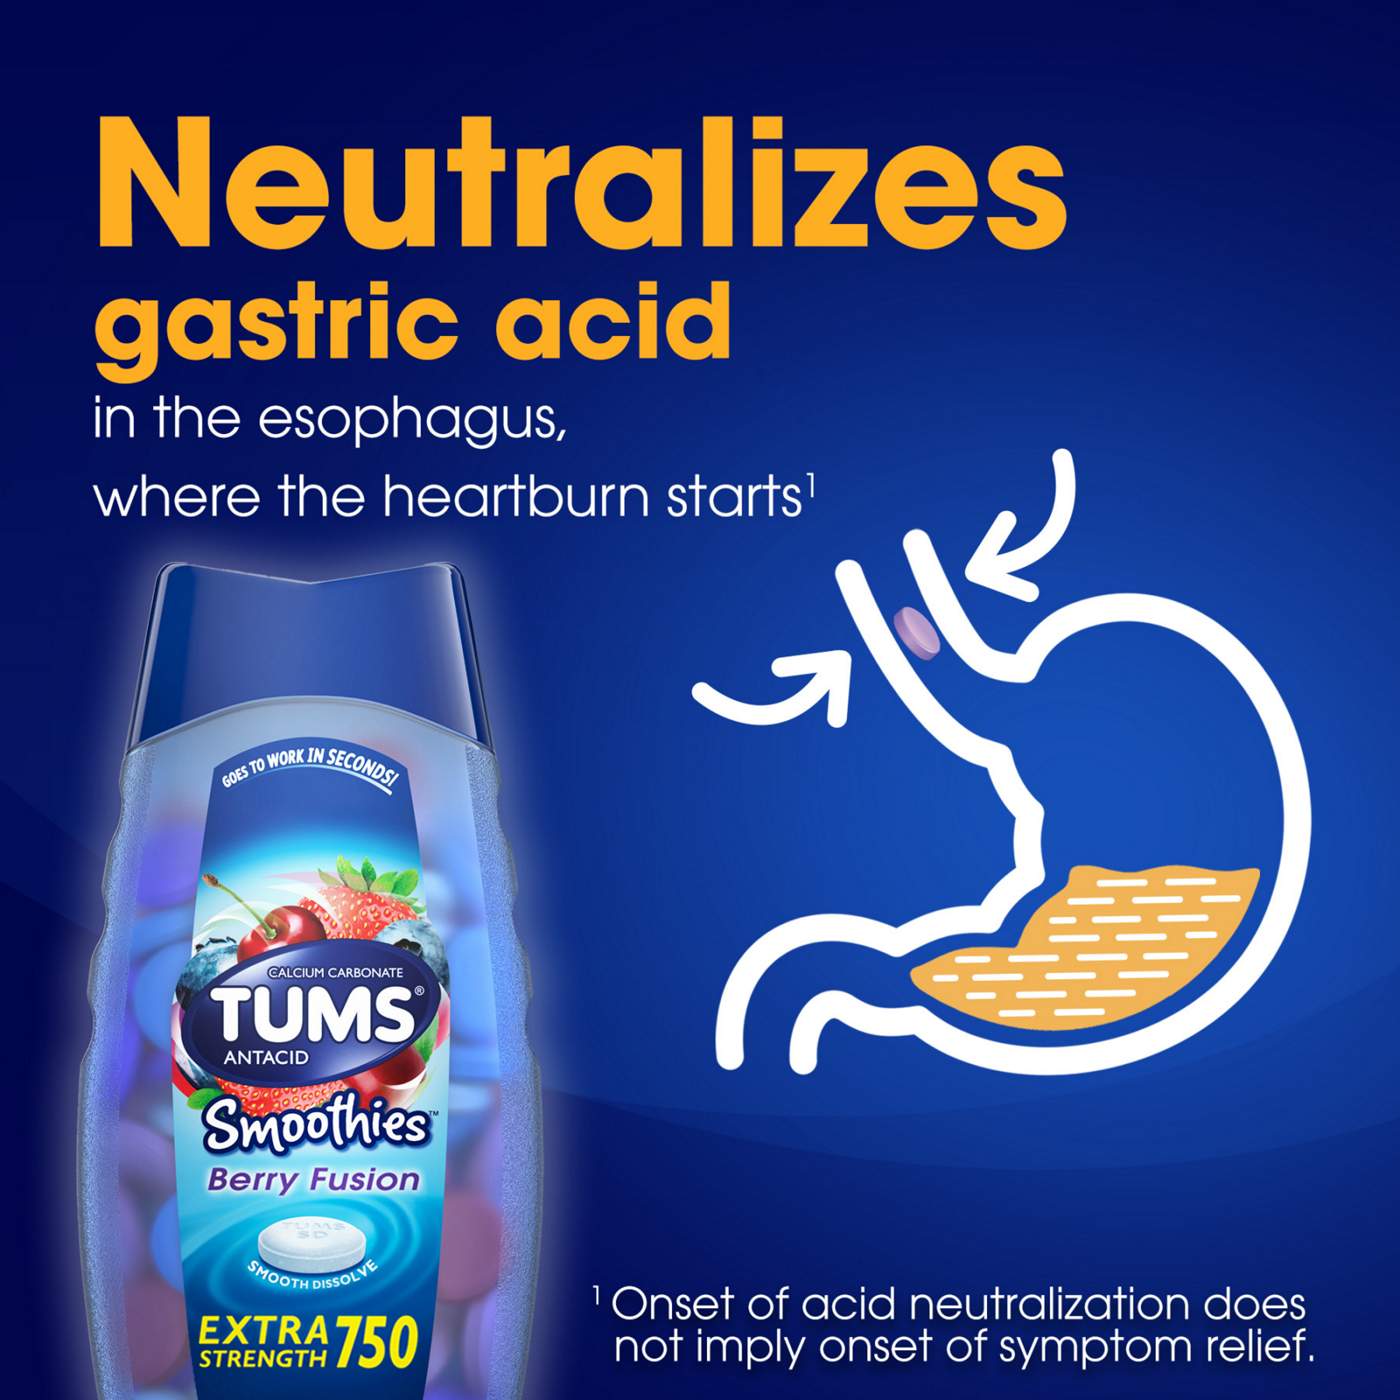 Tums Antacid Smoothies Chewable Tablets - Berry Fusion; image 6 of 8